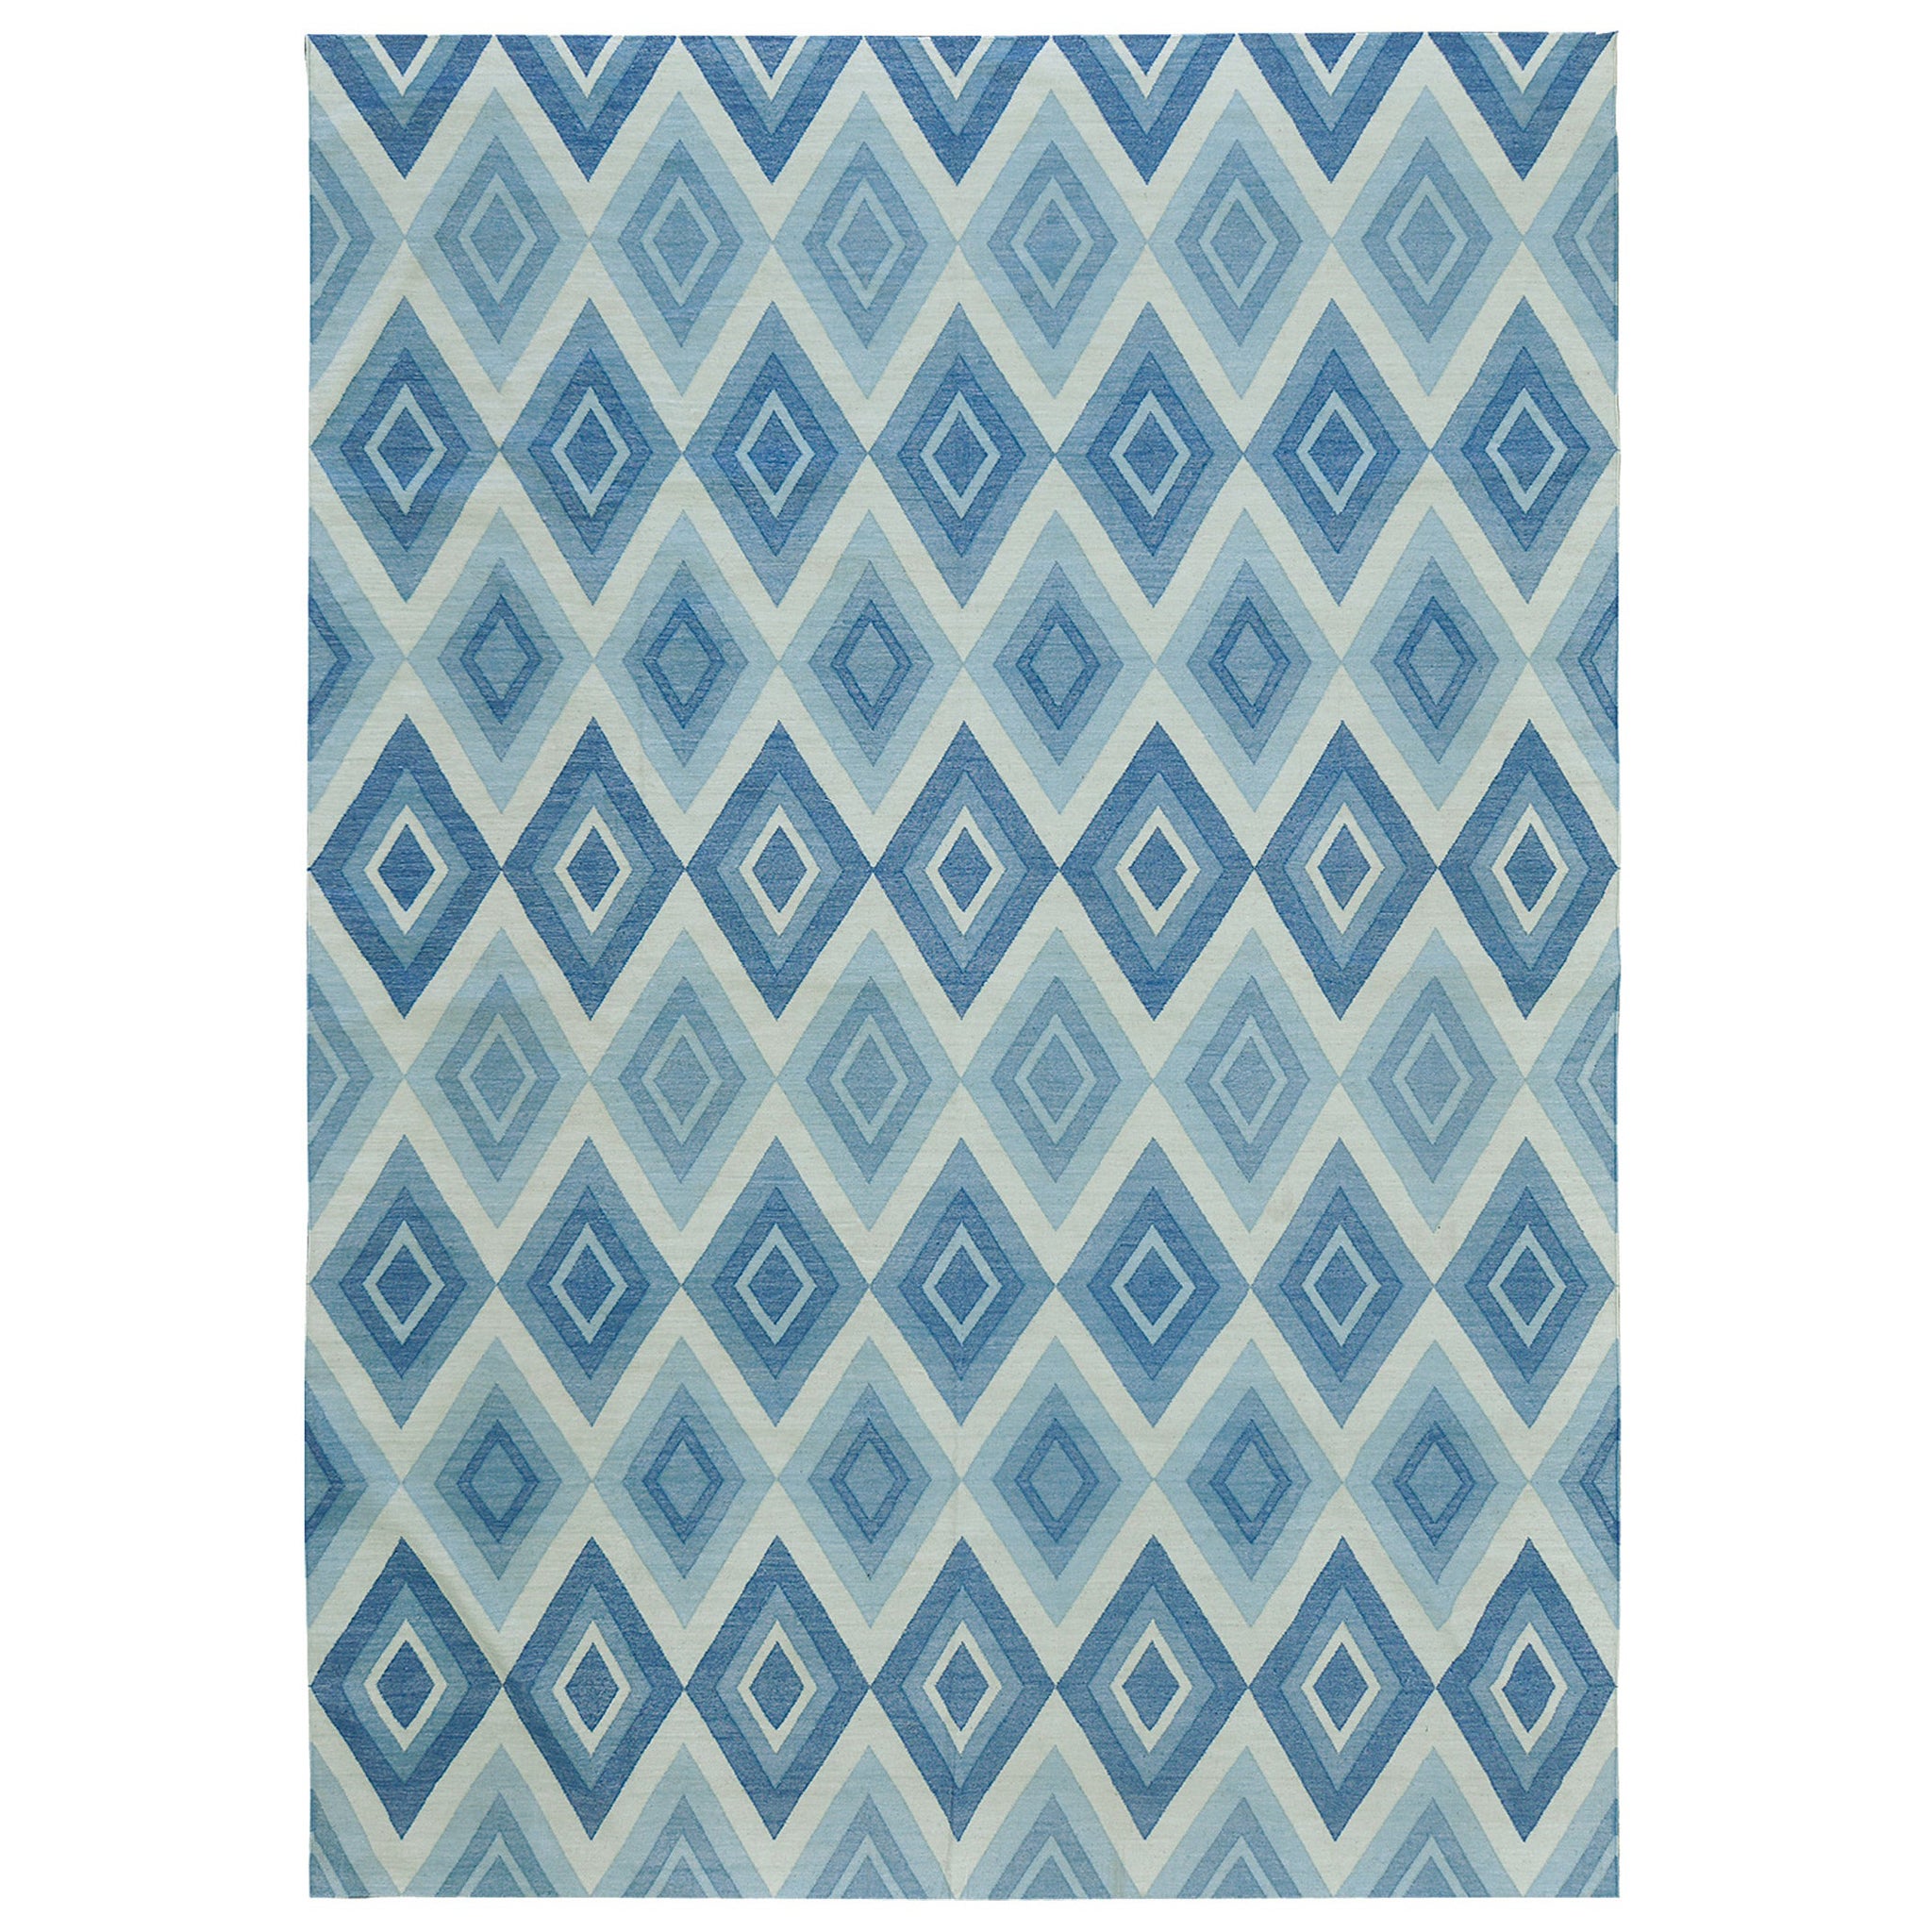 Contemporary Flat-Weave Rug Cielo Collection Permata Turquoise